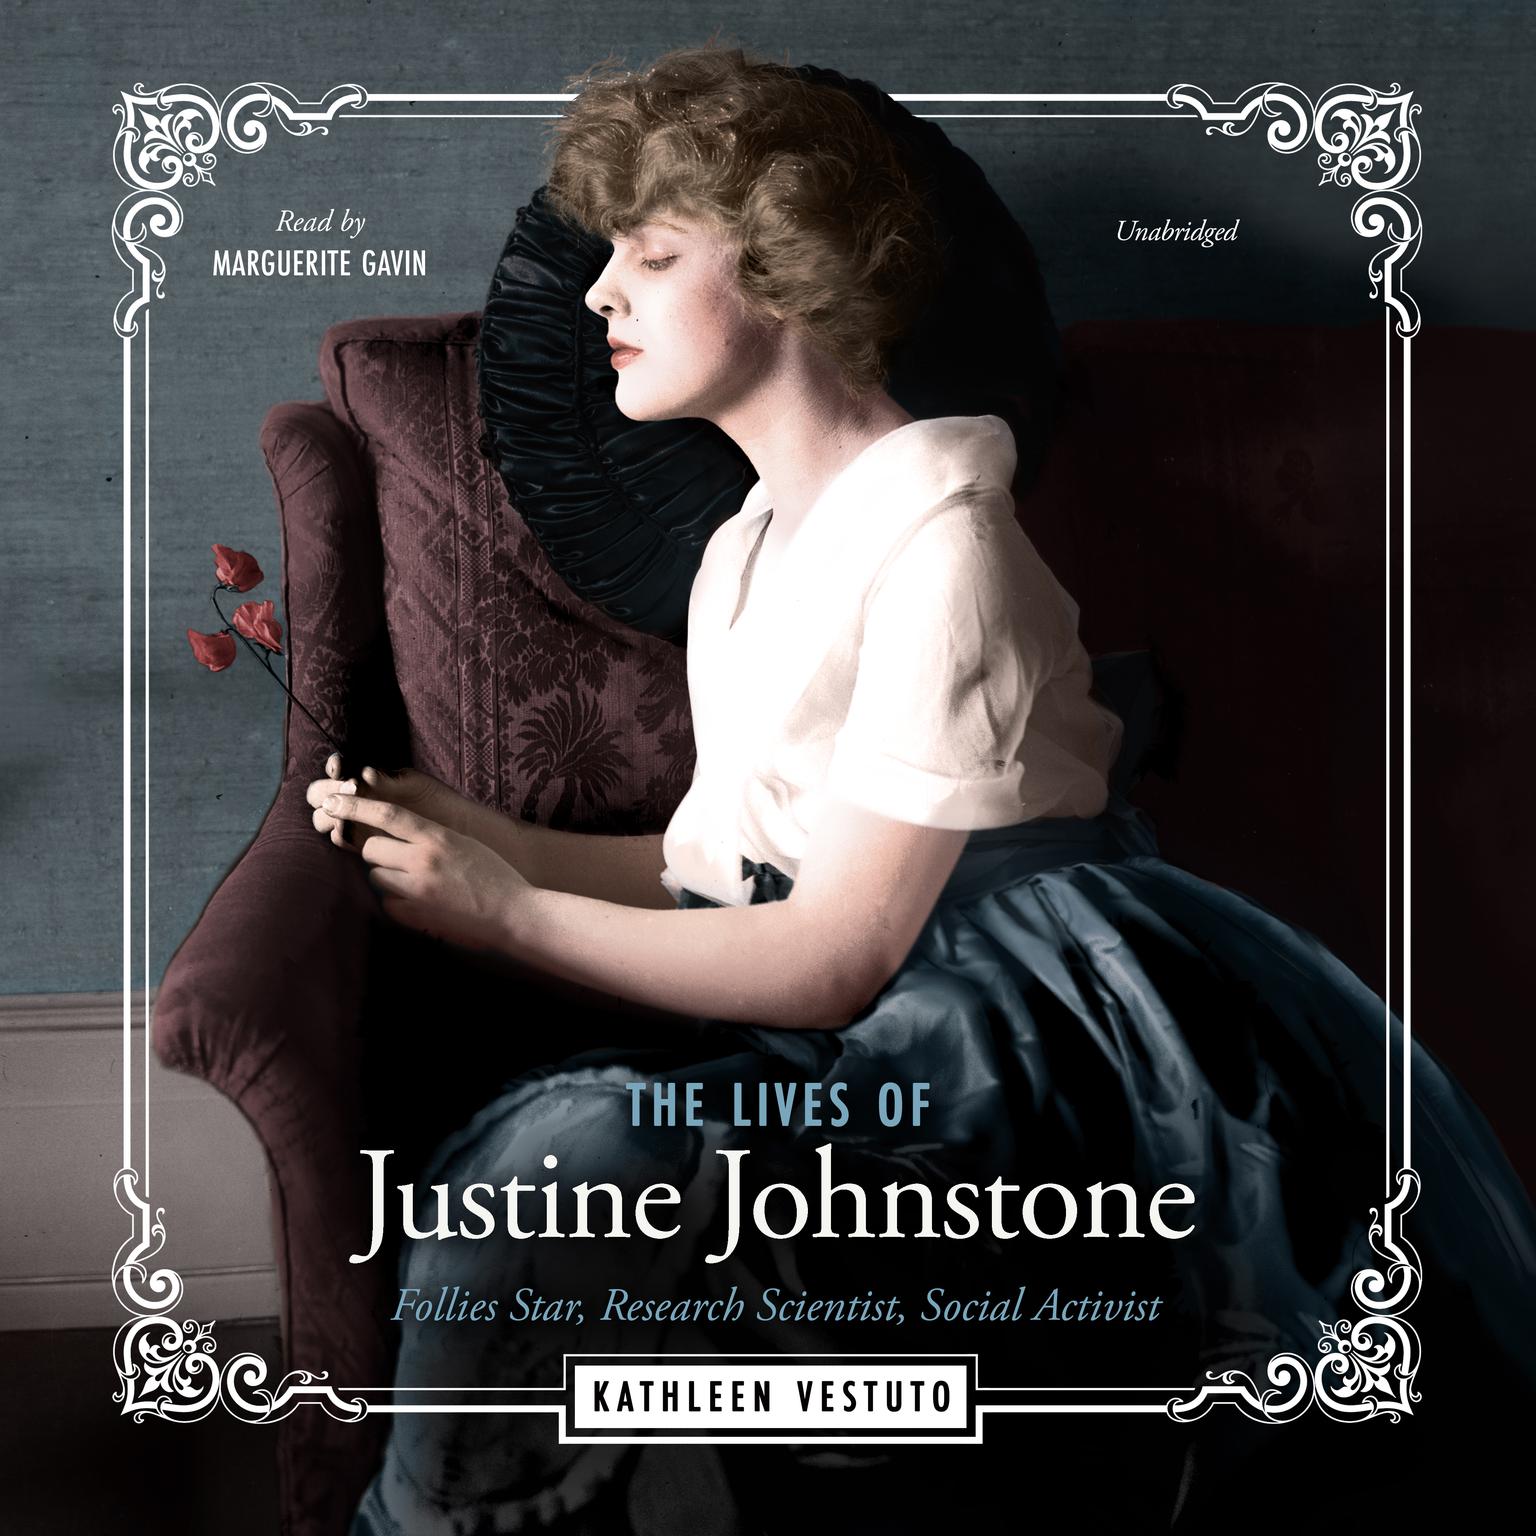 The Lives of Justine Johnstone: Follies Star, Research Scientist, Social Activist Audiobook, by Kathleen Vestuto